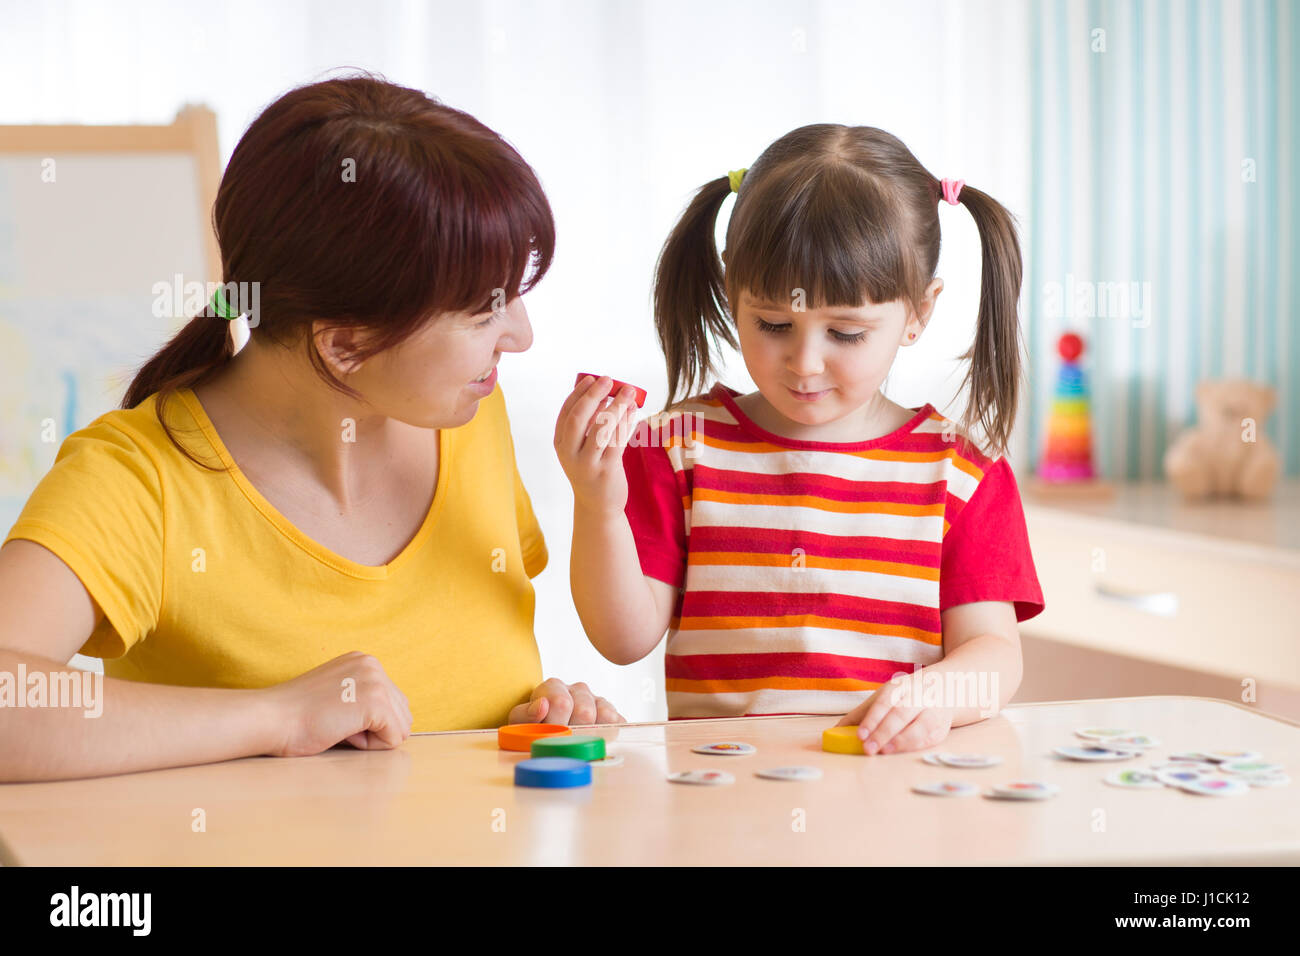 Kid playing with speech therapist Stock Photo